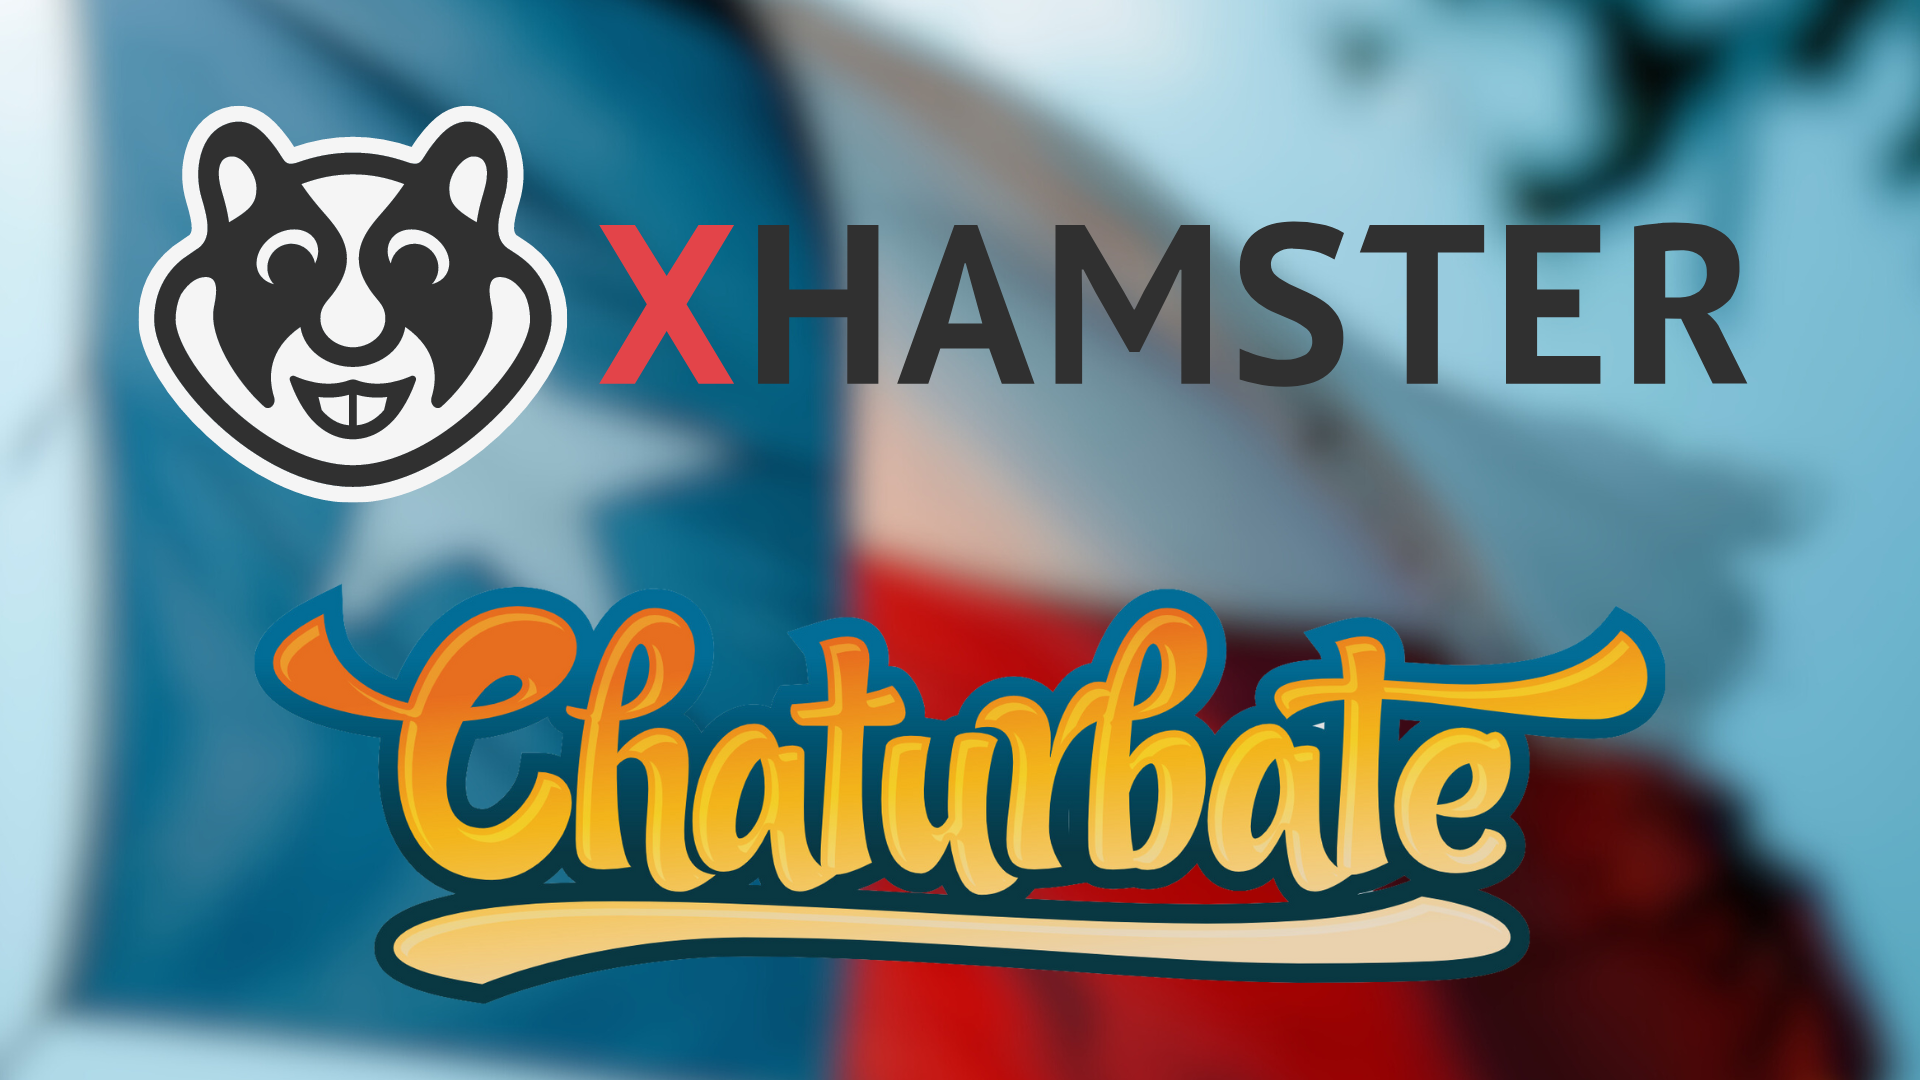 Texas Sues xHamster and Chaturbate